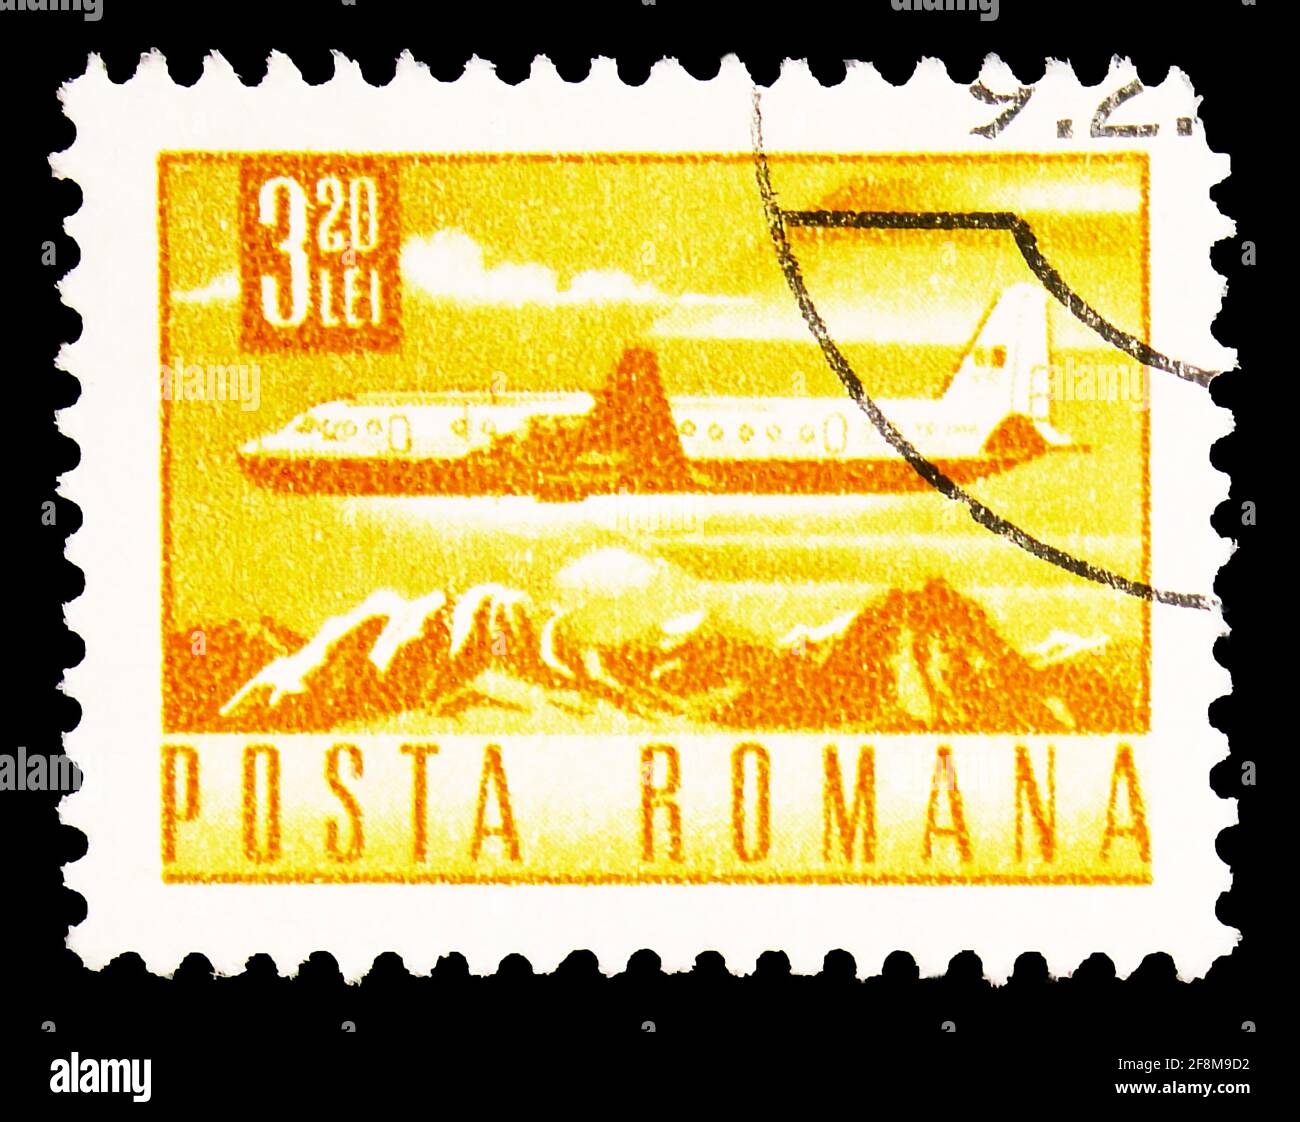 MOSCOW, RUSSIA - SEPTEMBER 30, 2019: Postage stamp printed in Romania shows Ilyushin Il-18 Airliner over Mountain Landscape, Postal and Transport seri Stock Photo